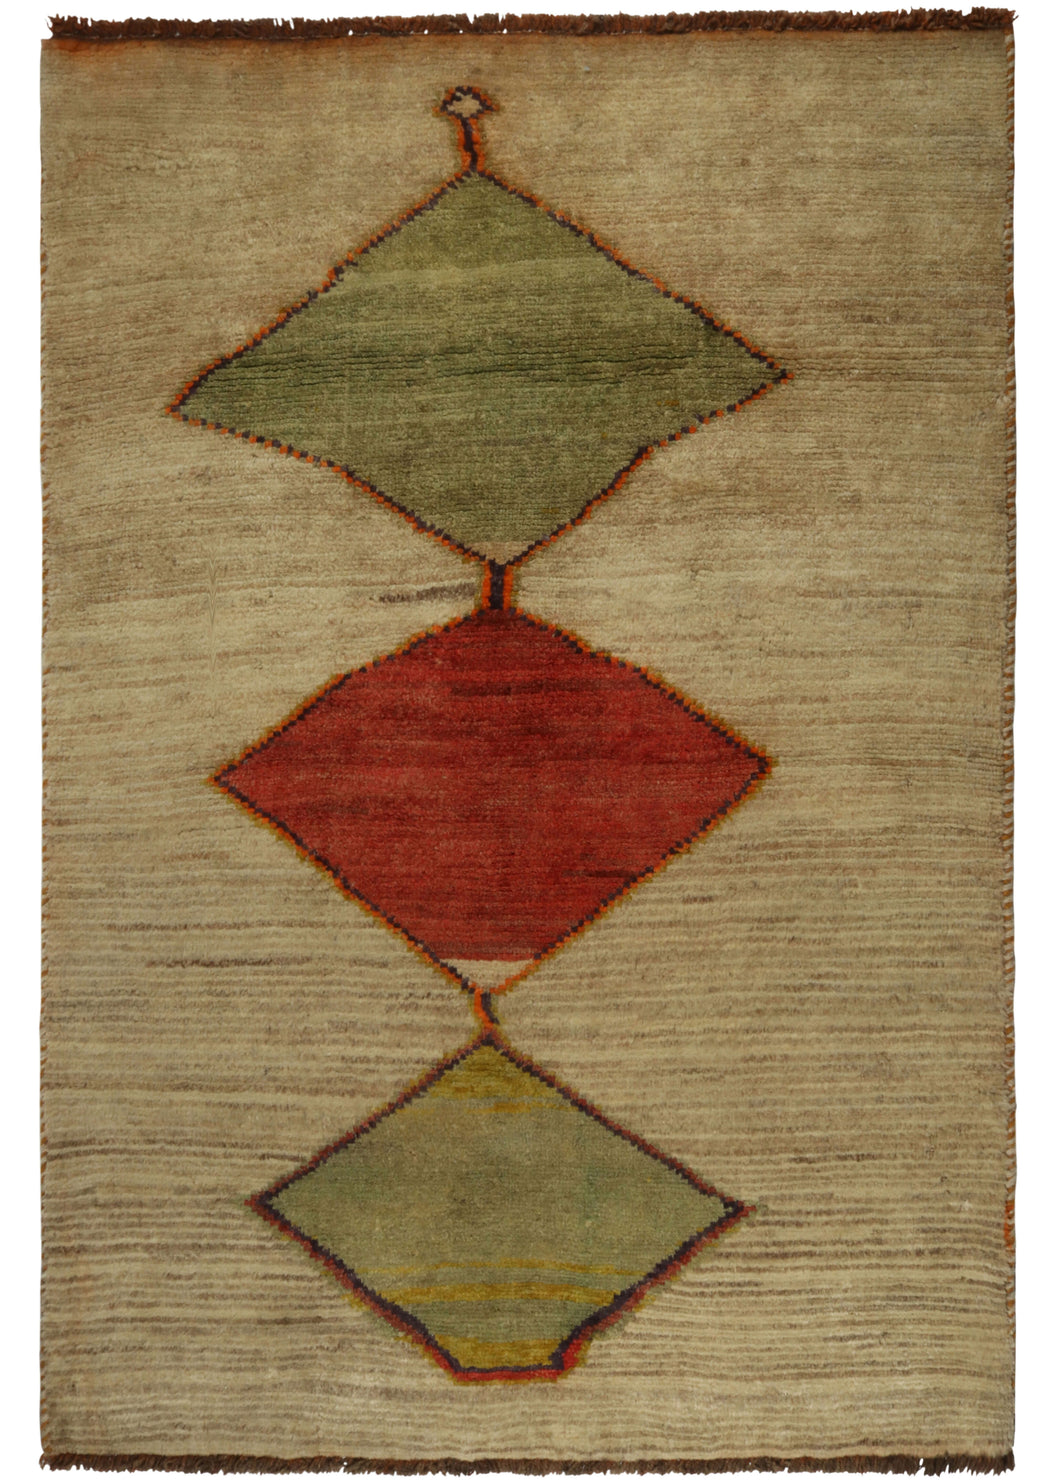 This Vintage Diamond Gabbeh Rug features a central red diamond flanked by two pale green diamonds on a vast field of undyed wool in cream with brown striations. The diamonds are outlined in orange and brown giving them a little extra glow. Each diamond is of a slightly different scale and distinctive in its wonkiness and gives the appearance of shapes stacked atop one another.